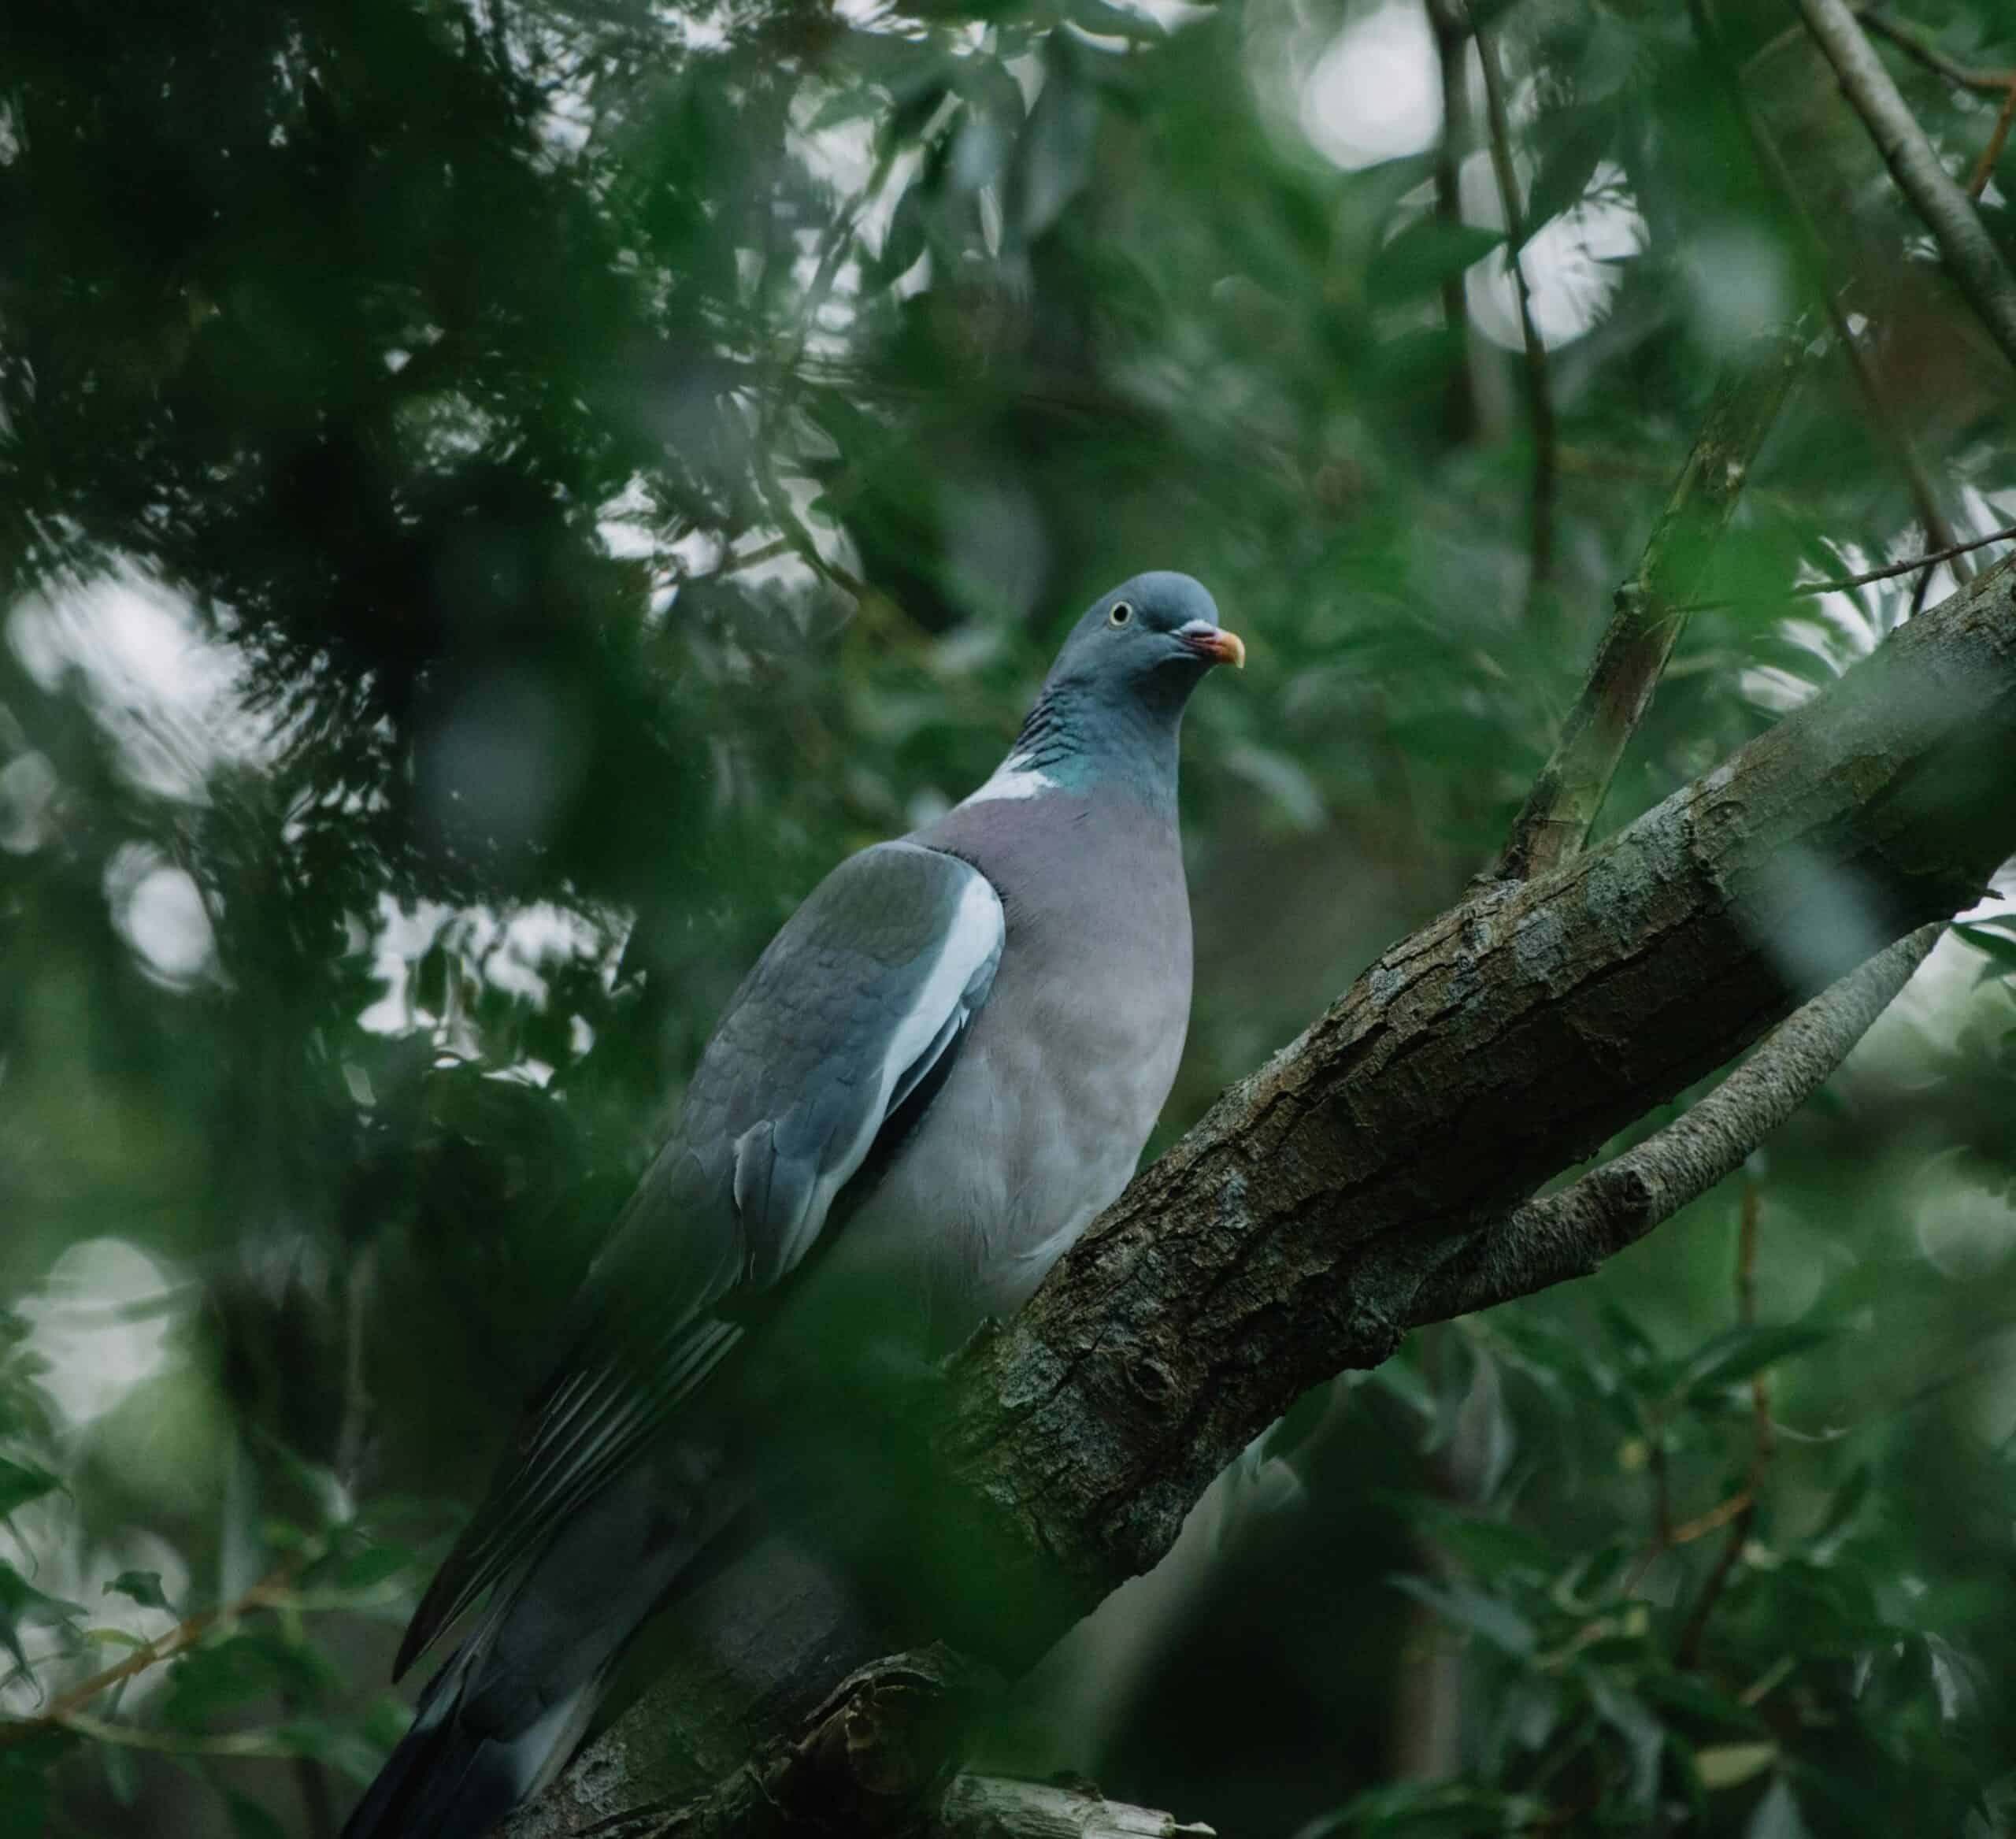 Wood pigeon, a native species in the Western Ghats, India – a biodiversity hotspot of unique fauna